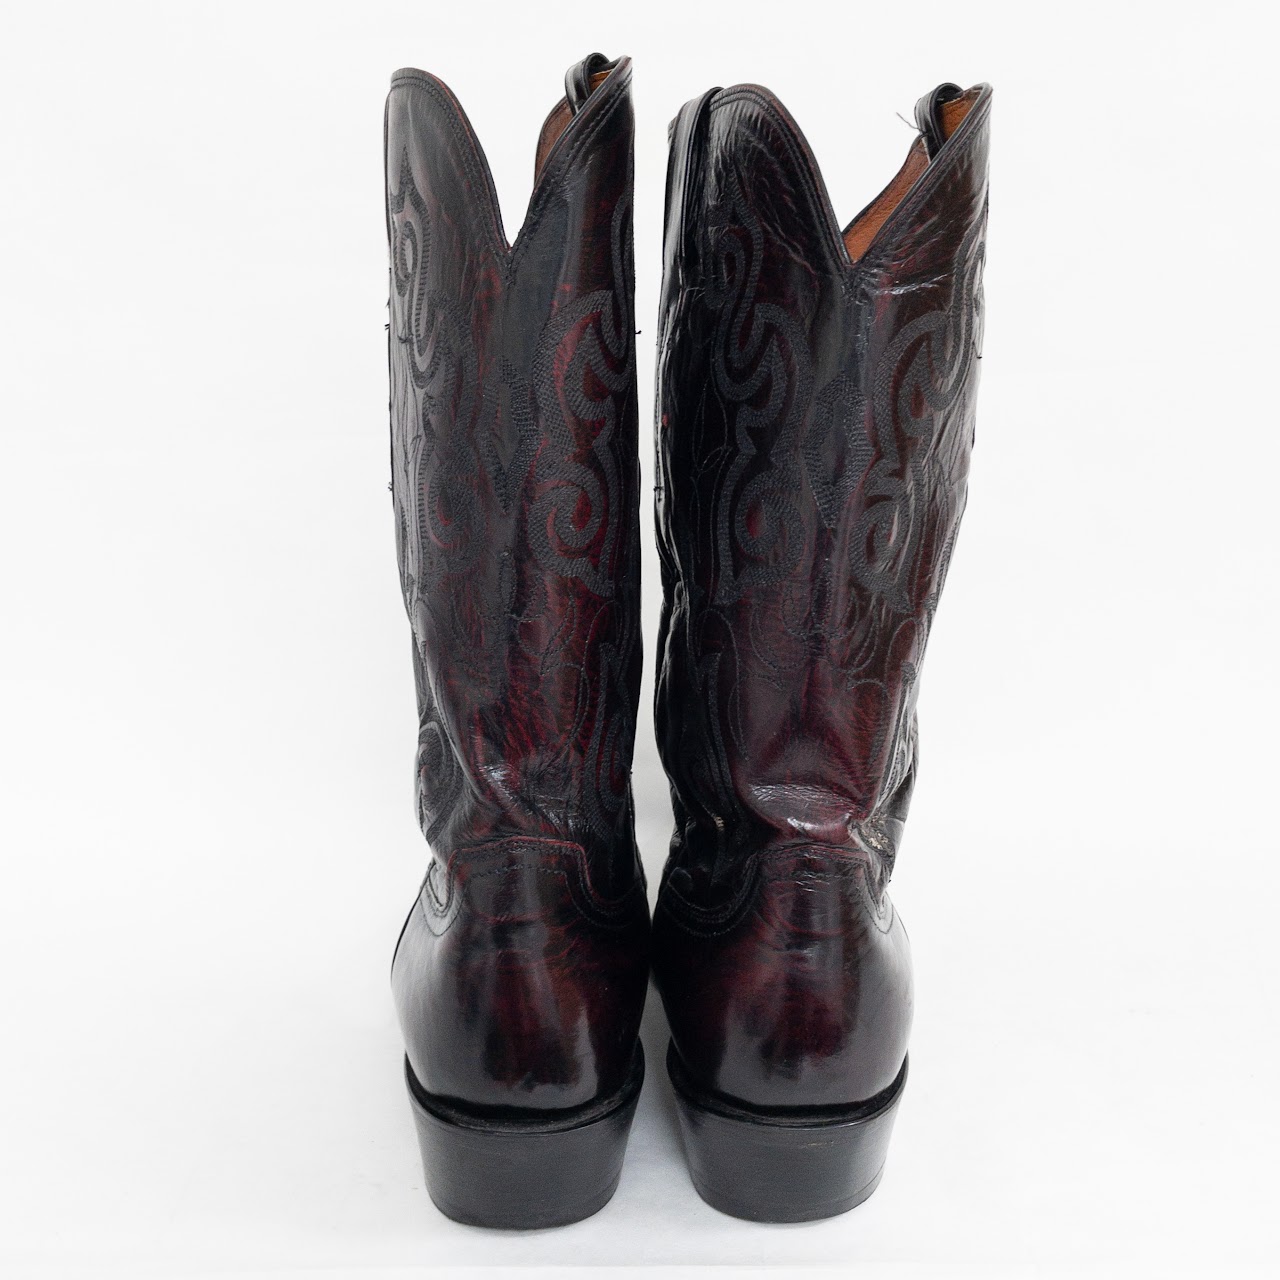 Lucchese Western Boots